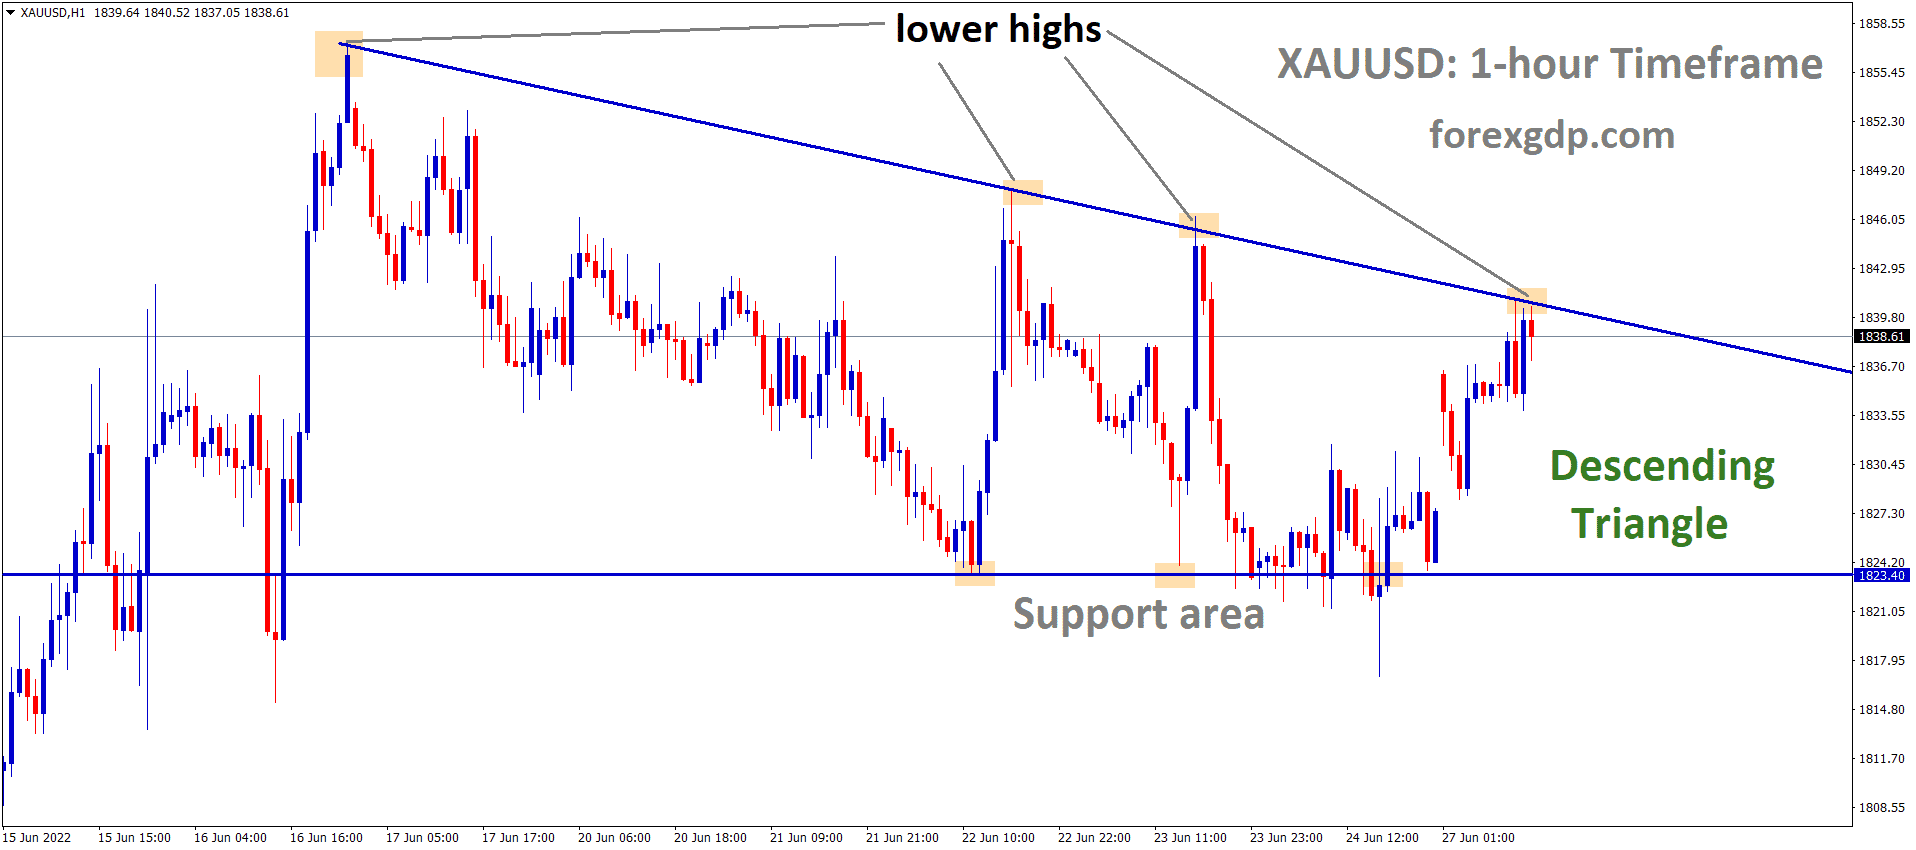 XAUUSD Gold price is moving in the Descending triangle pattern and the Market has reached the Lower high area of the Pattern.